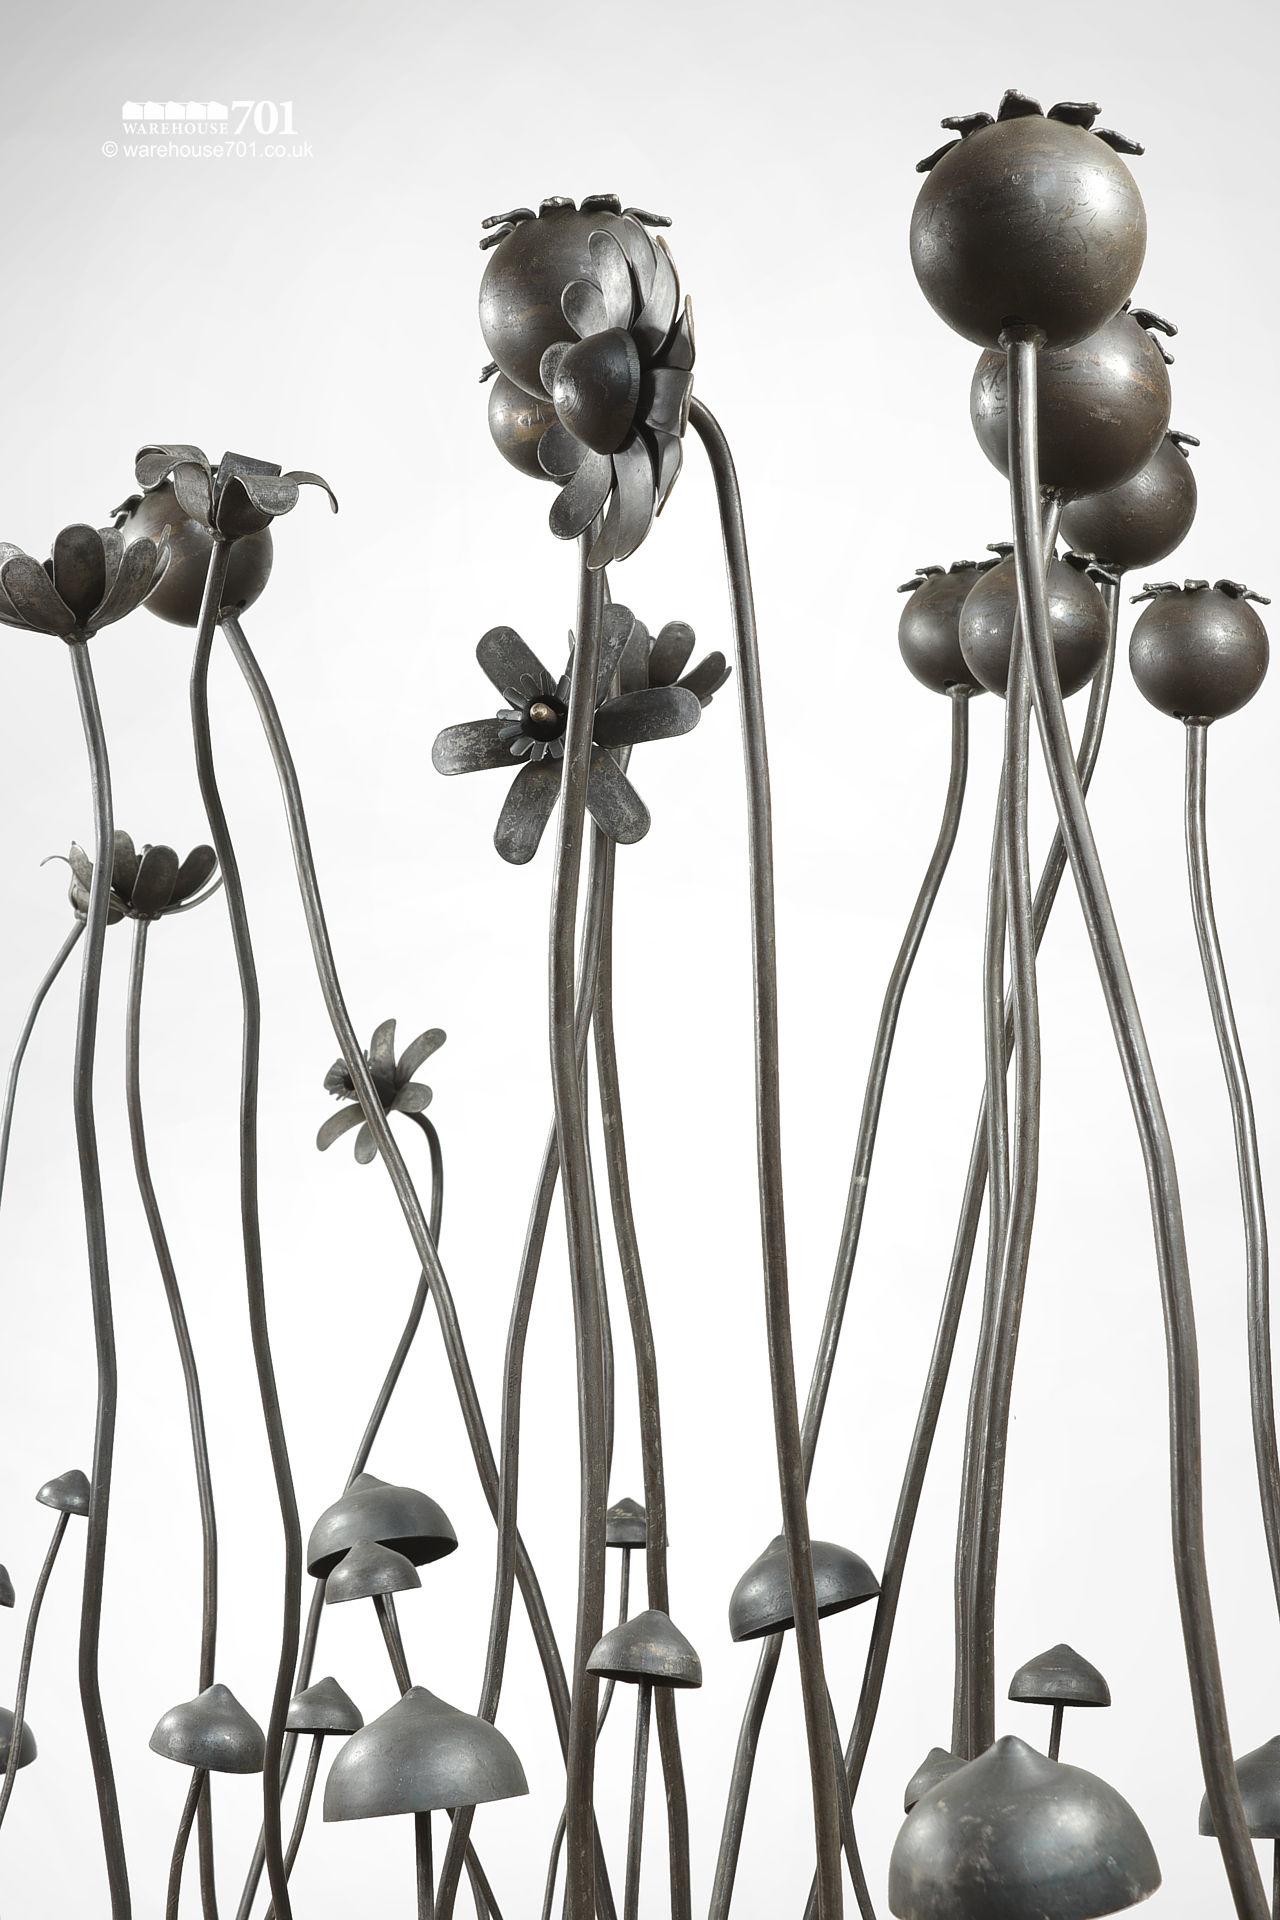 NEW Full Sized Sculptured Hand Made Metal Flowers and Fungi #1